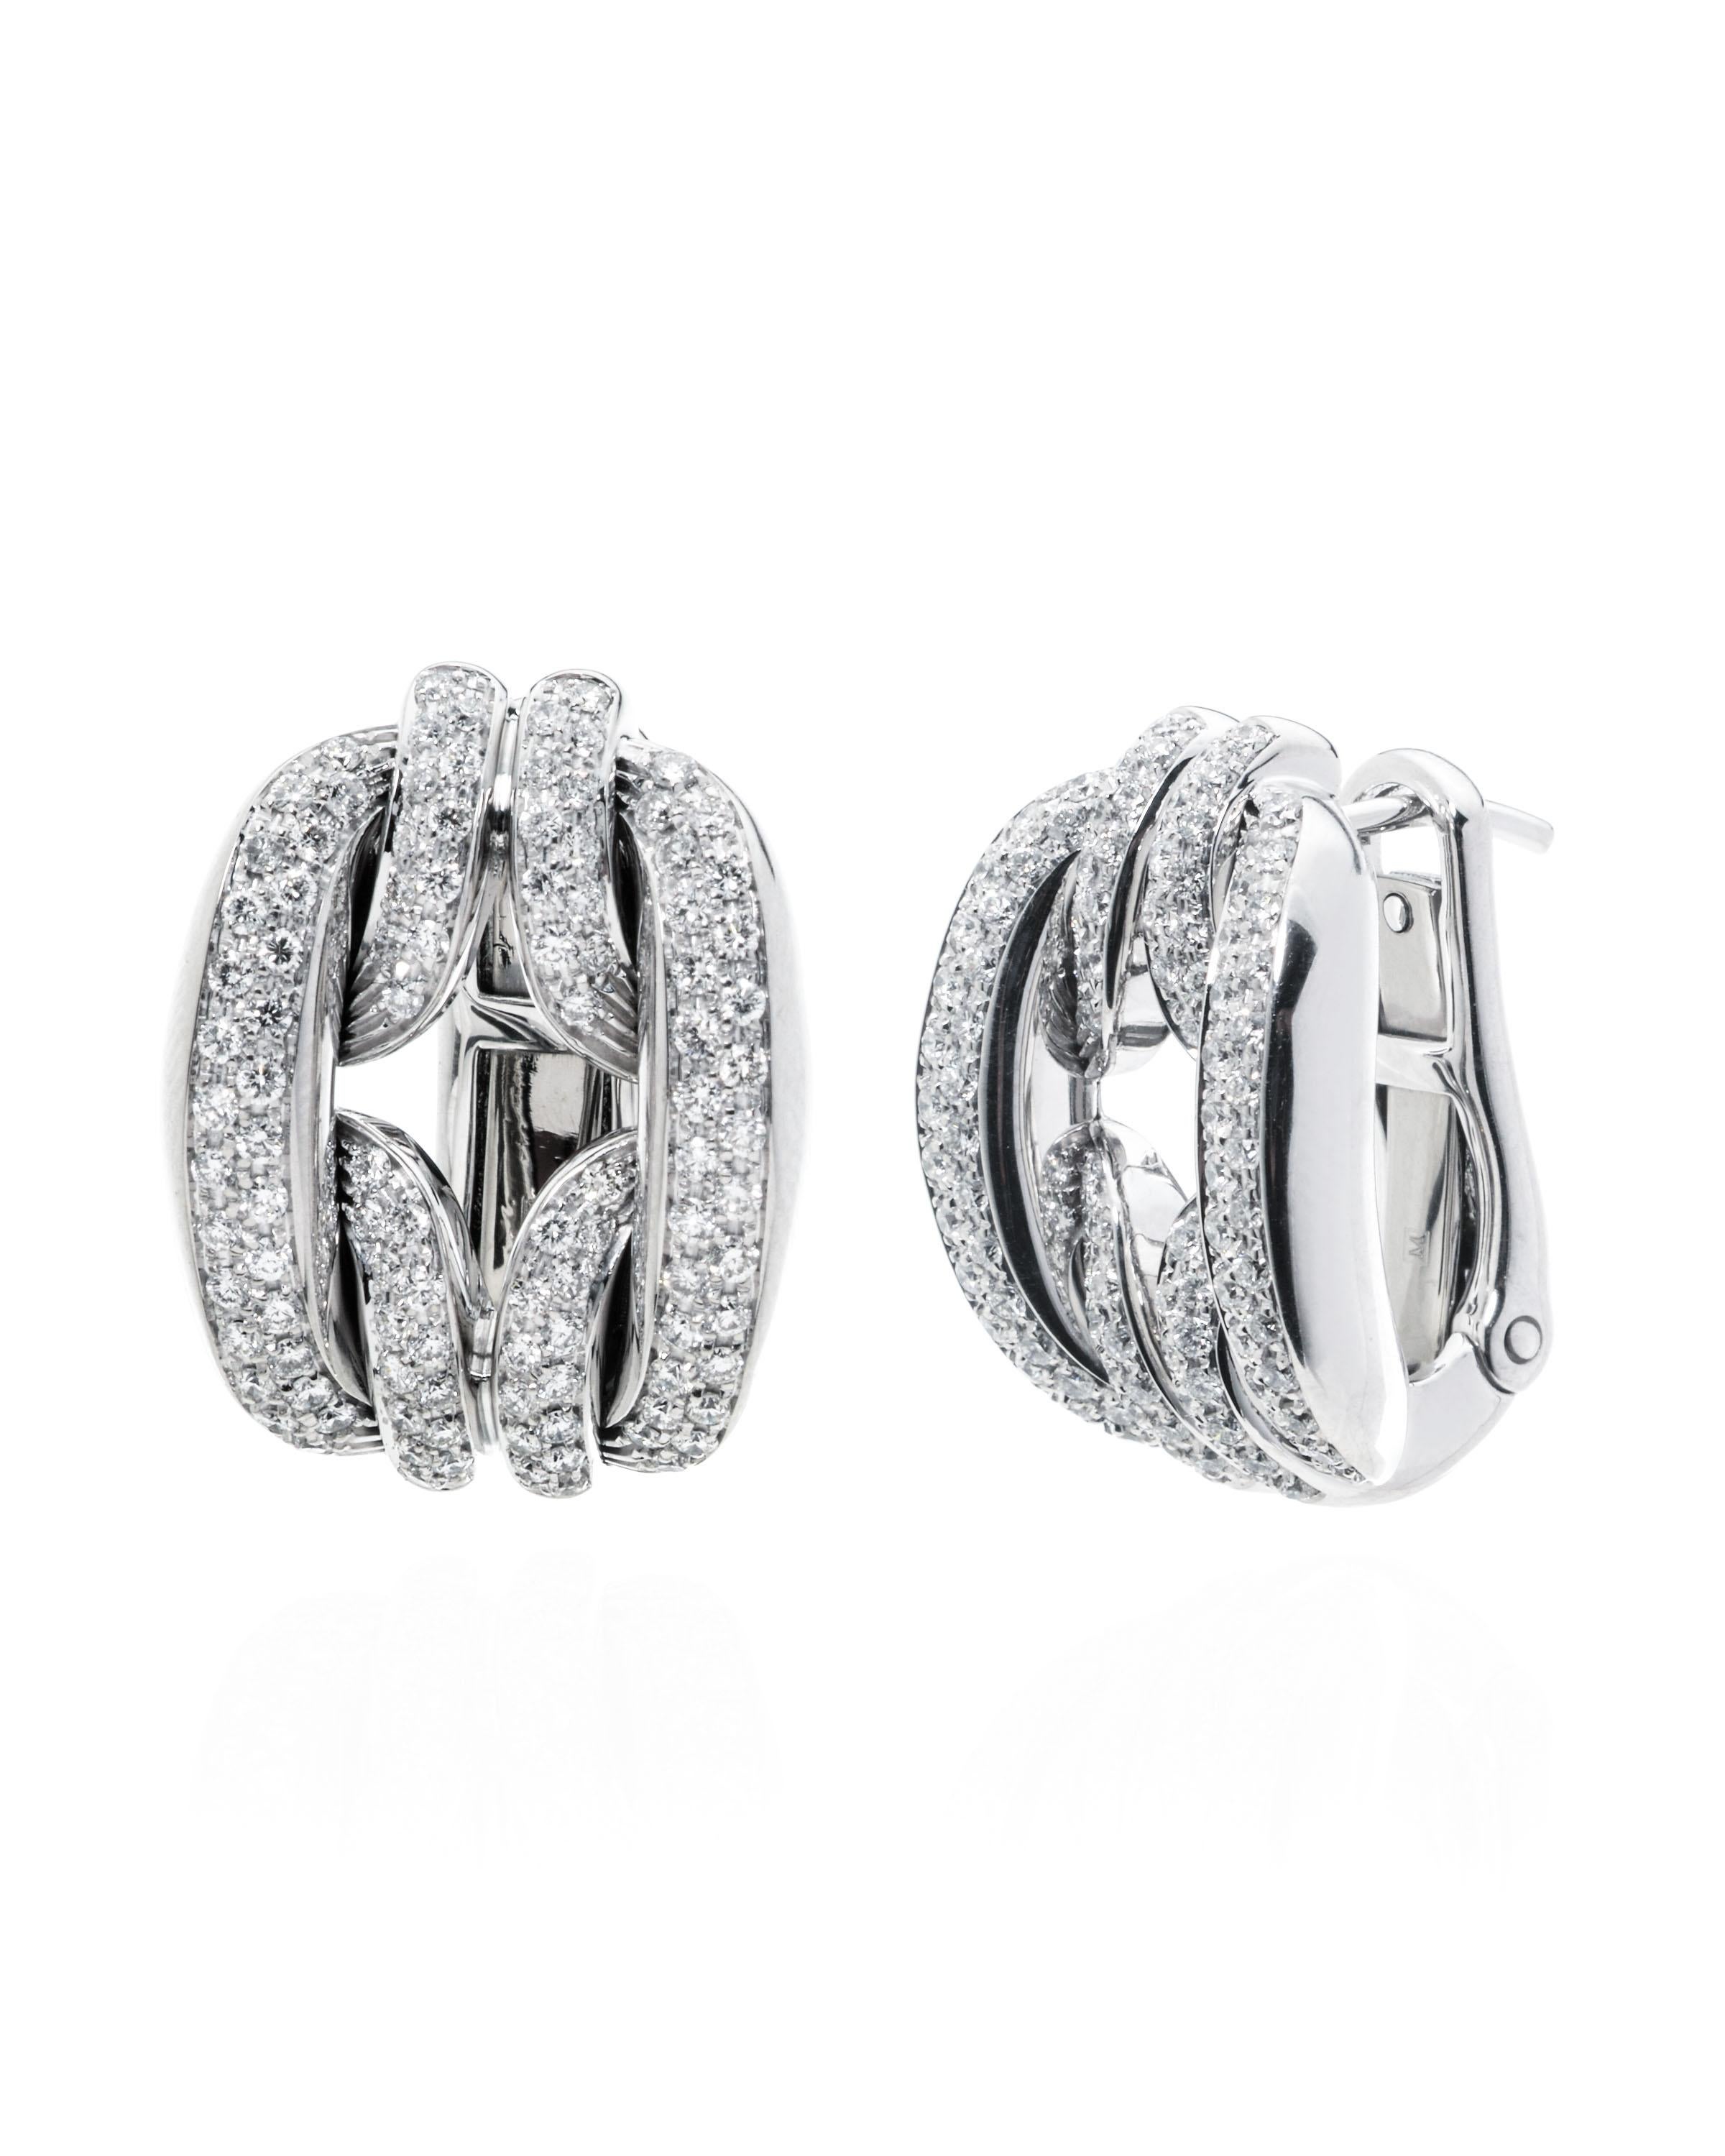 Damiani huggie earrings feature a diamond approximately 1.17ct. tw. studded 18 K white gold link. The drop size is 3/4